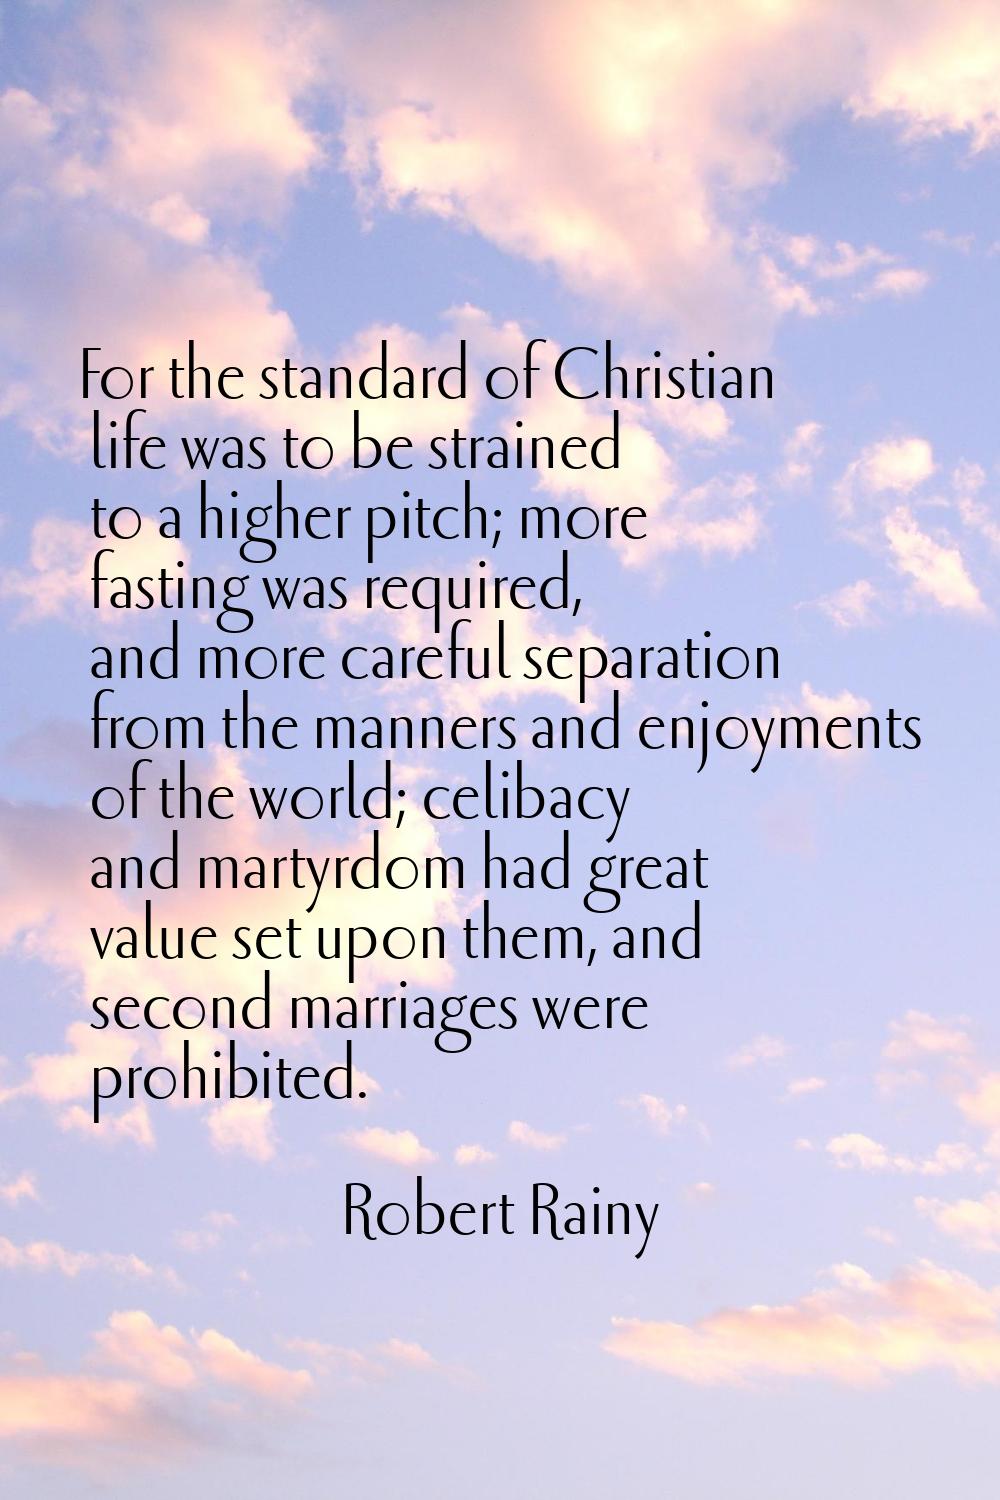 For the standard of Christian life was to be strained to a higher pitch; more fasting was required,